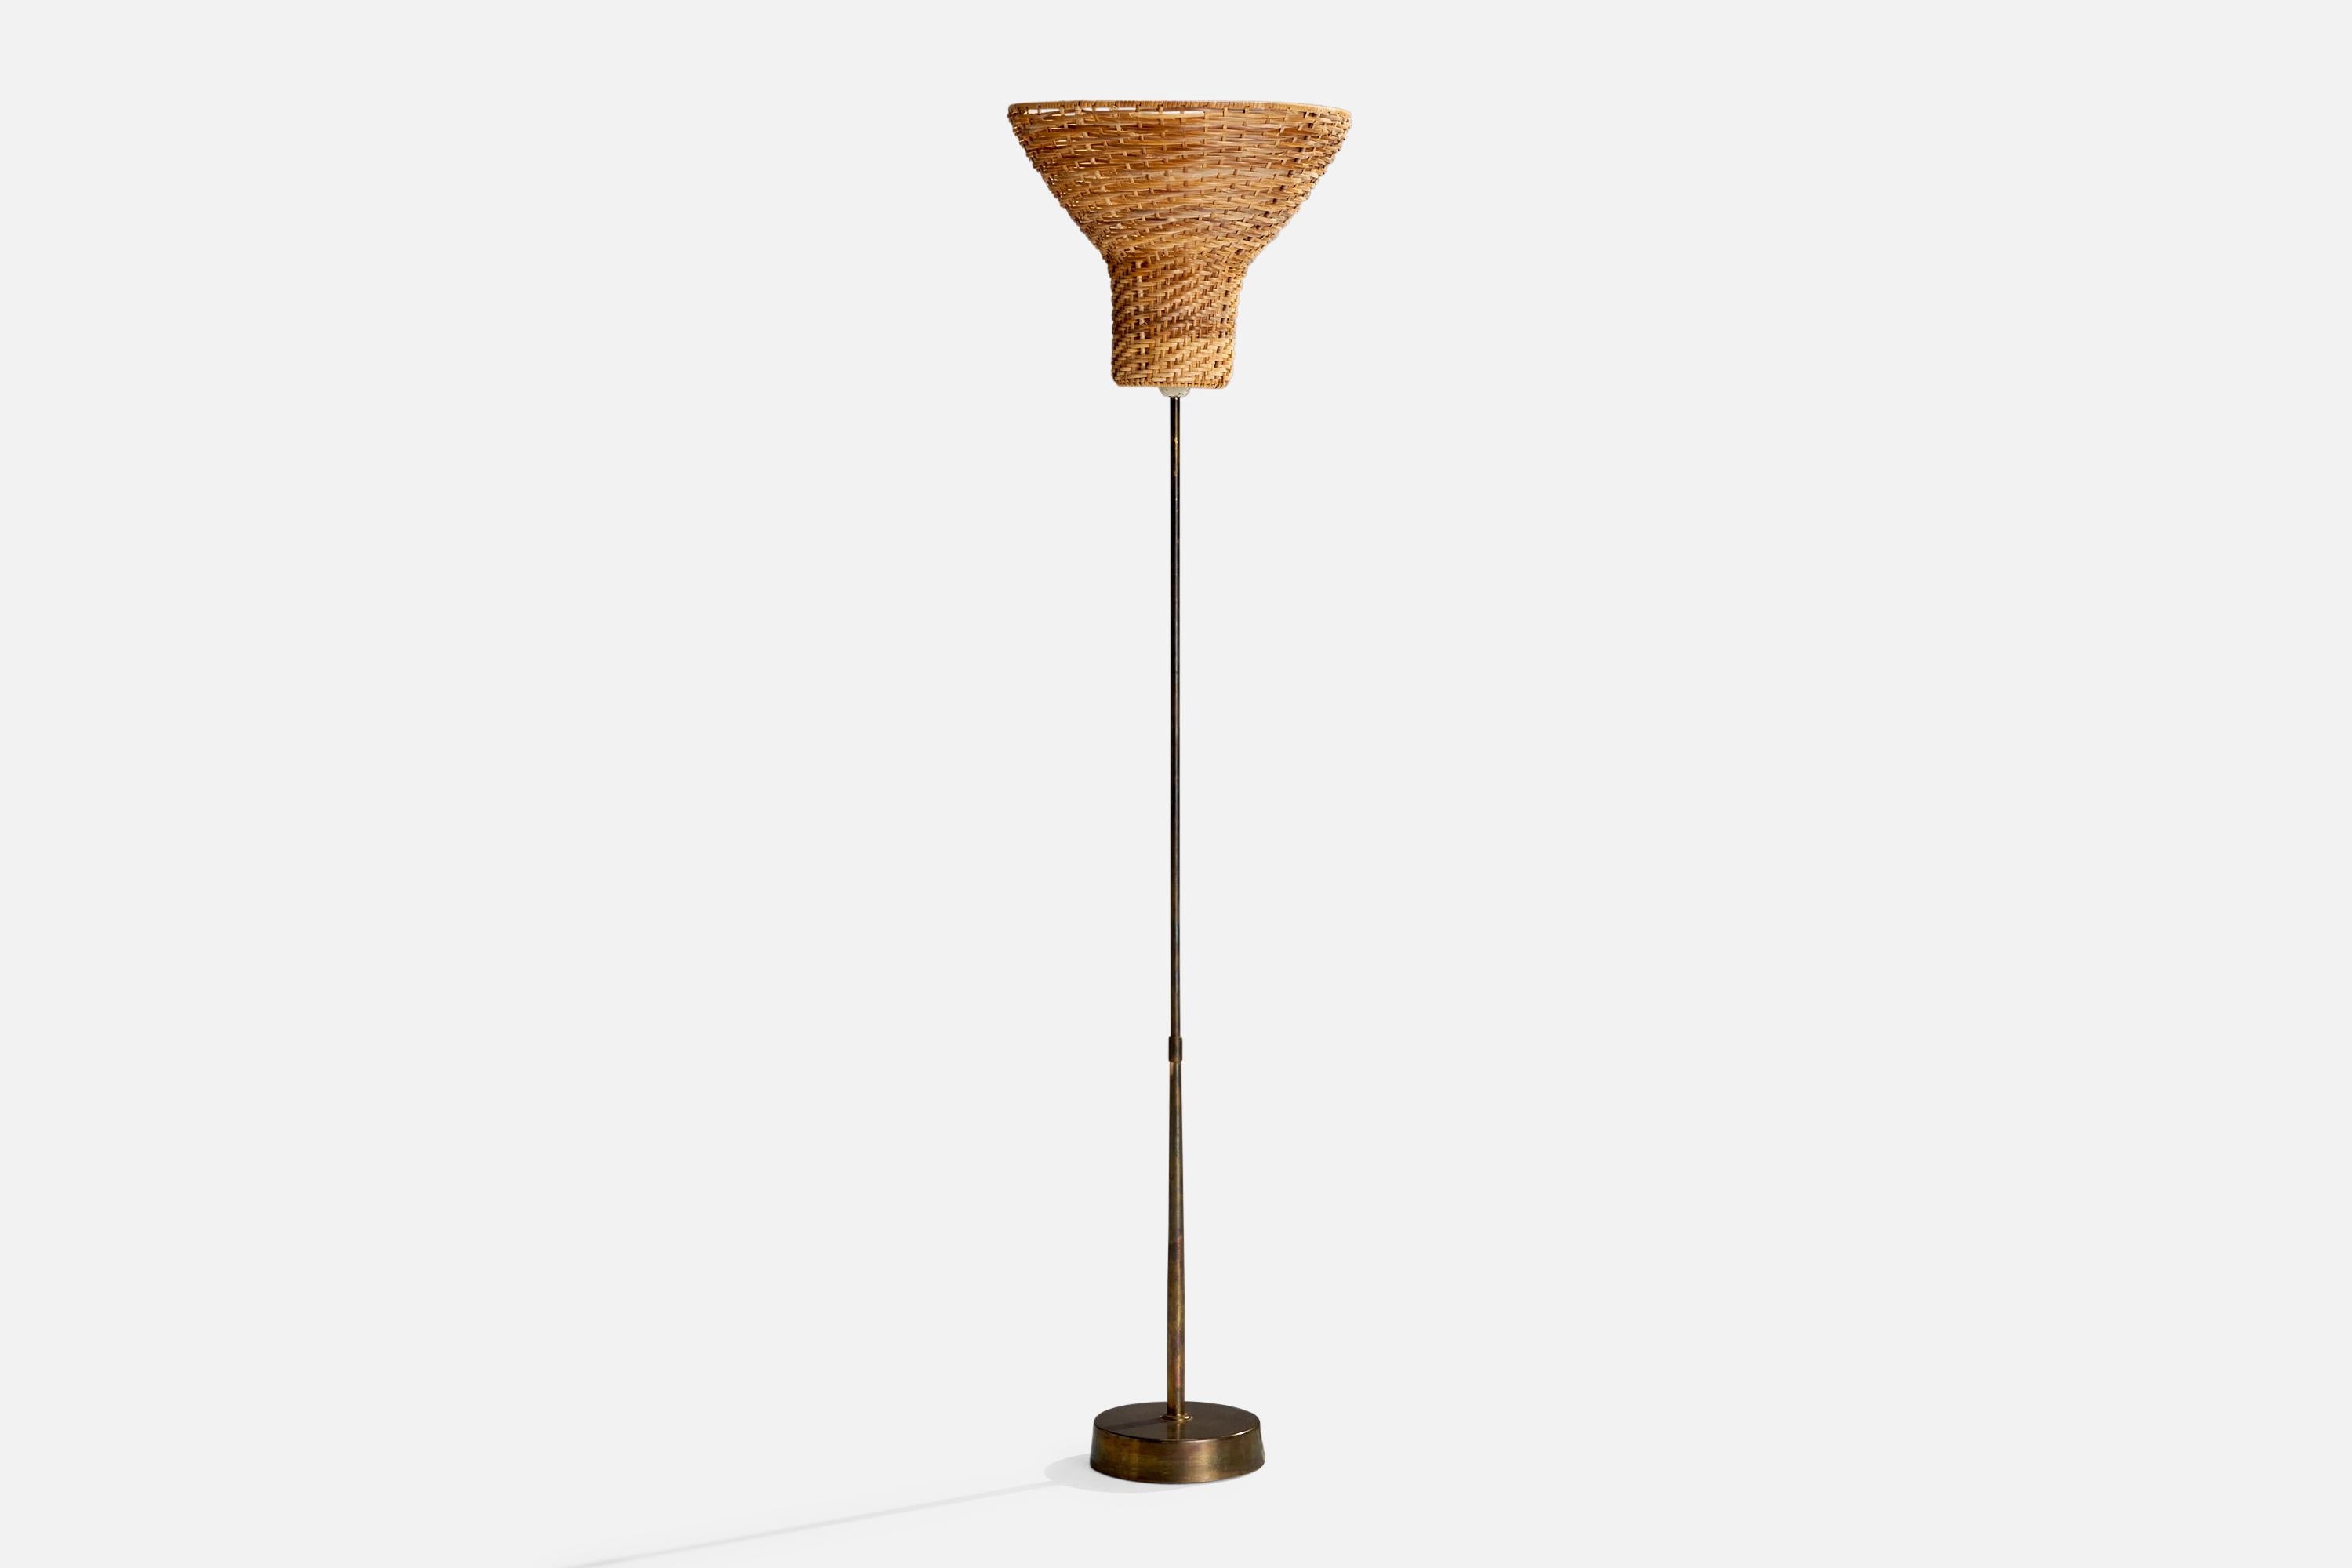 A brass and rattan floor lamp designed and produced by ASEA, Sweden, 1940s.

Overall Dimensions (inches): 54.34”  H x 13.39” W x 13.39” D
Stated dimensions include shade.
Bulb Specifications: E-26 Bulb
Number of Sockets: 1
All lighting will be